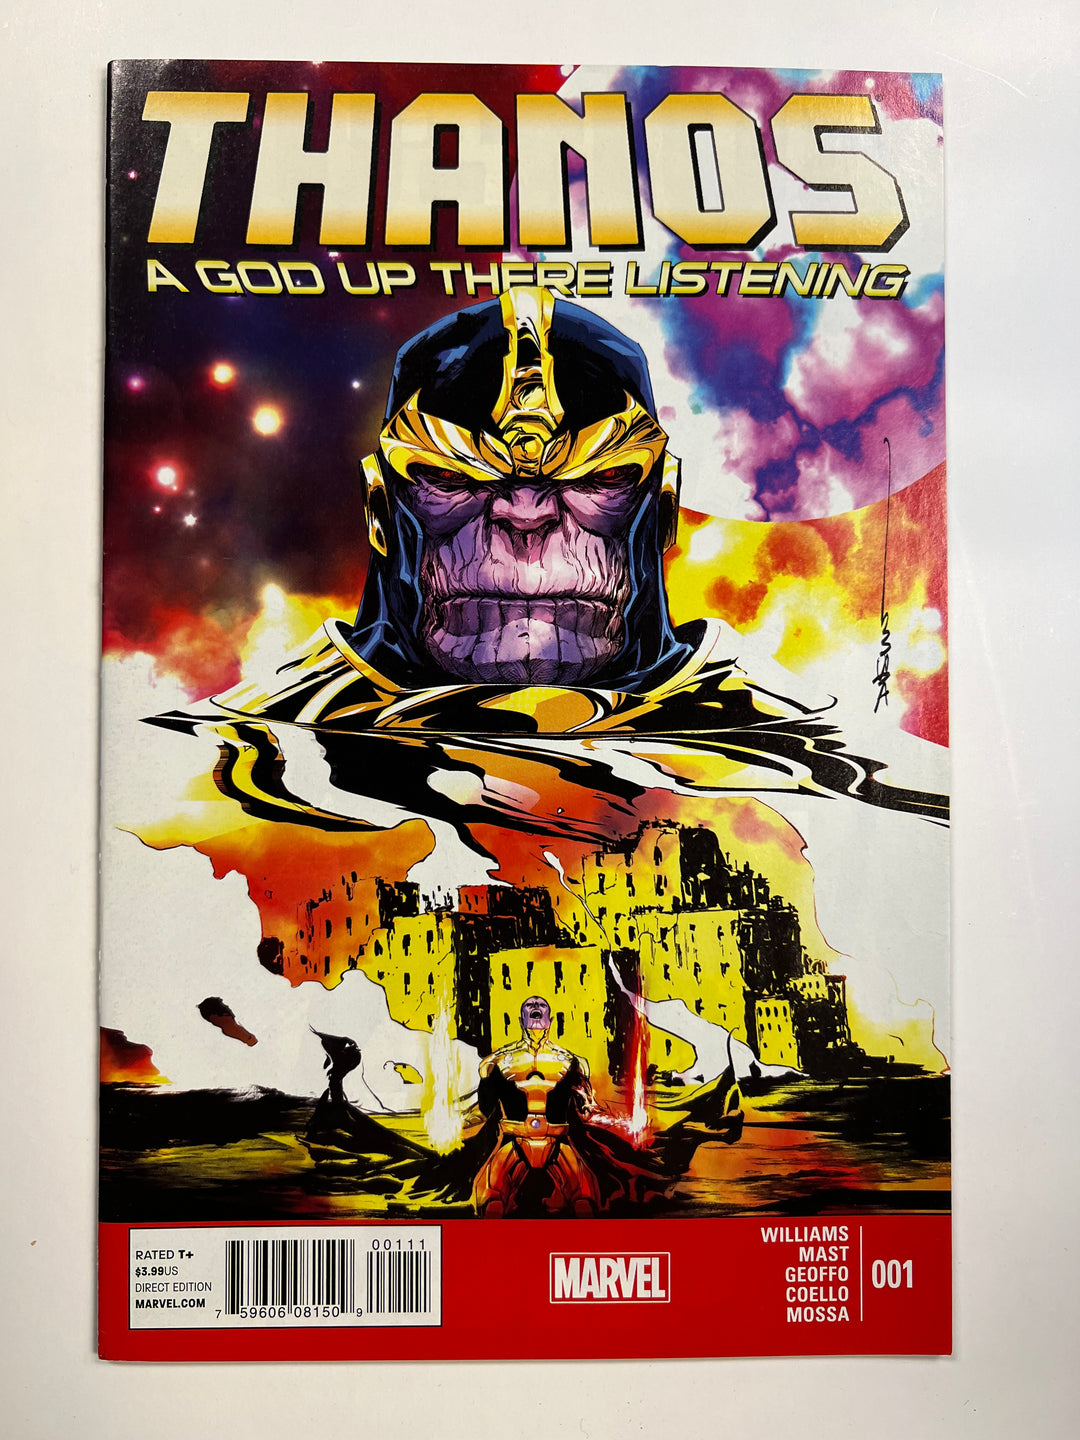 Thanos: A God Up There Listening #1 Marvel 2014 VF+